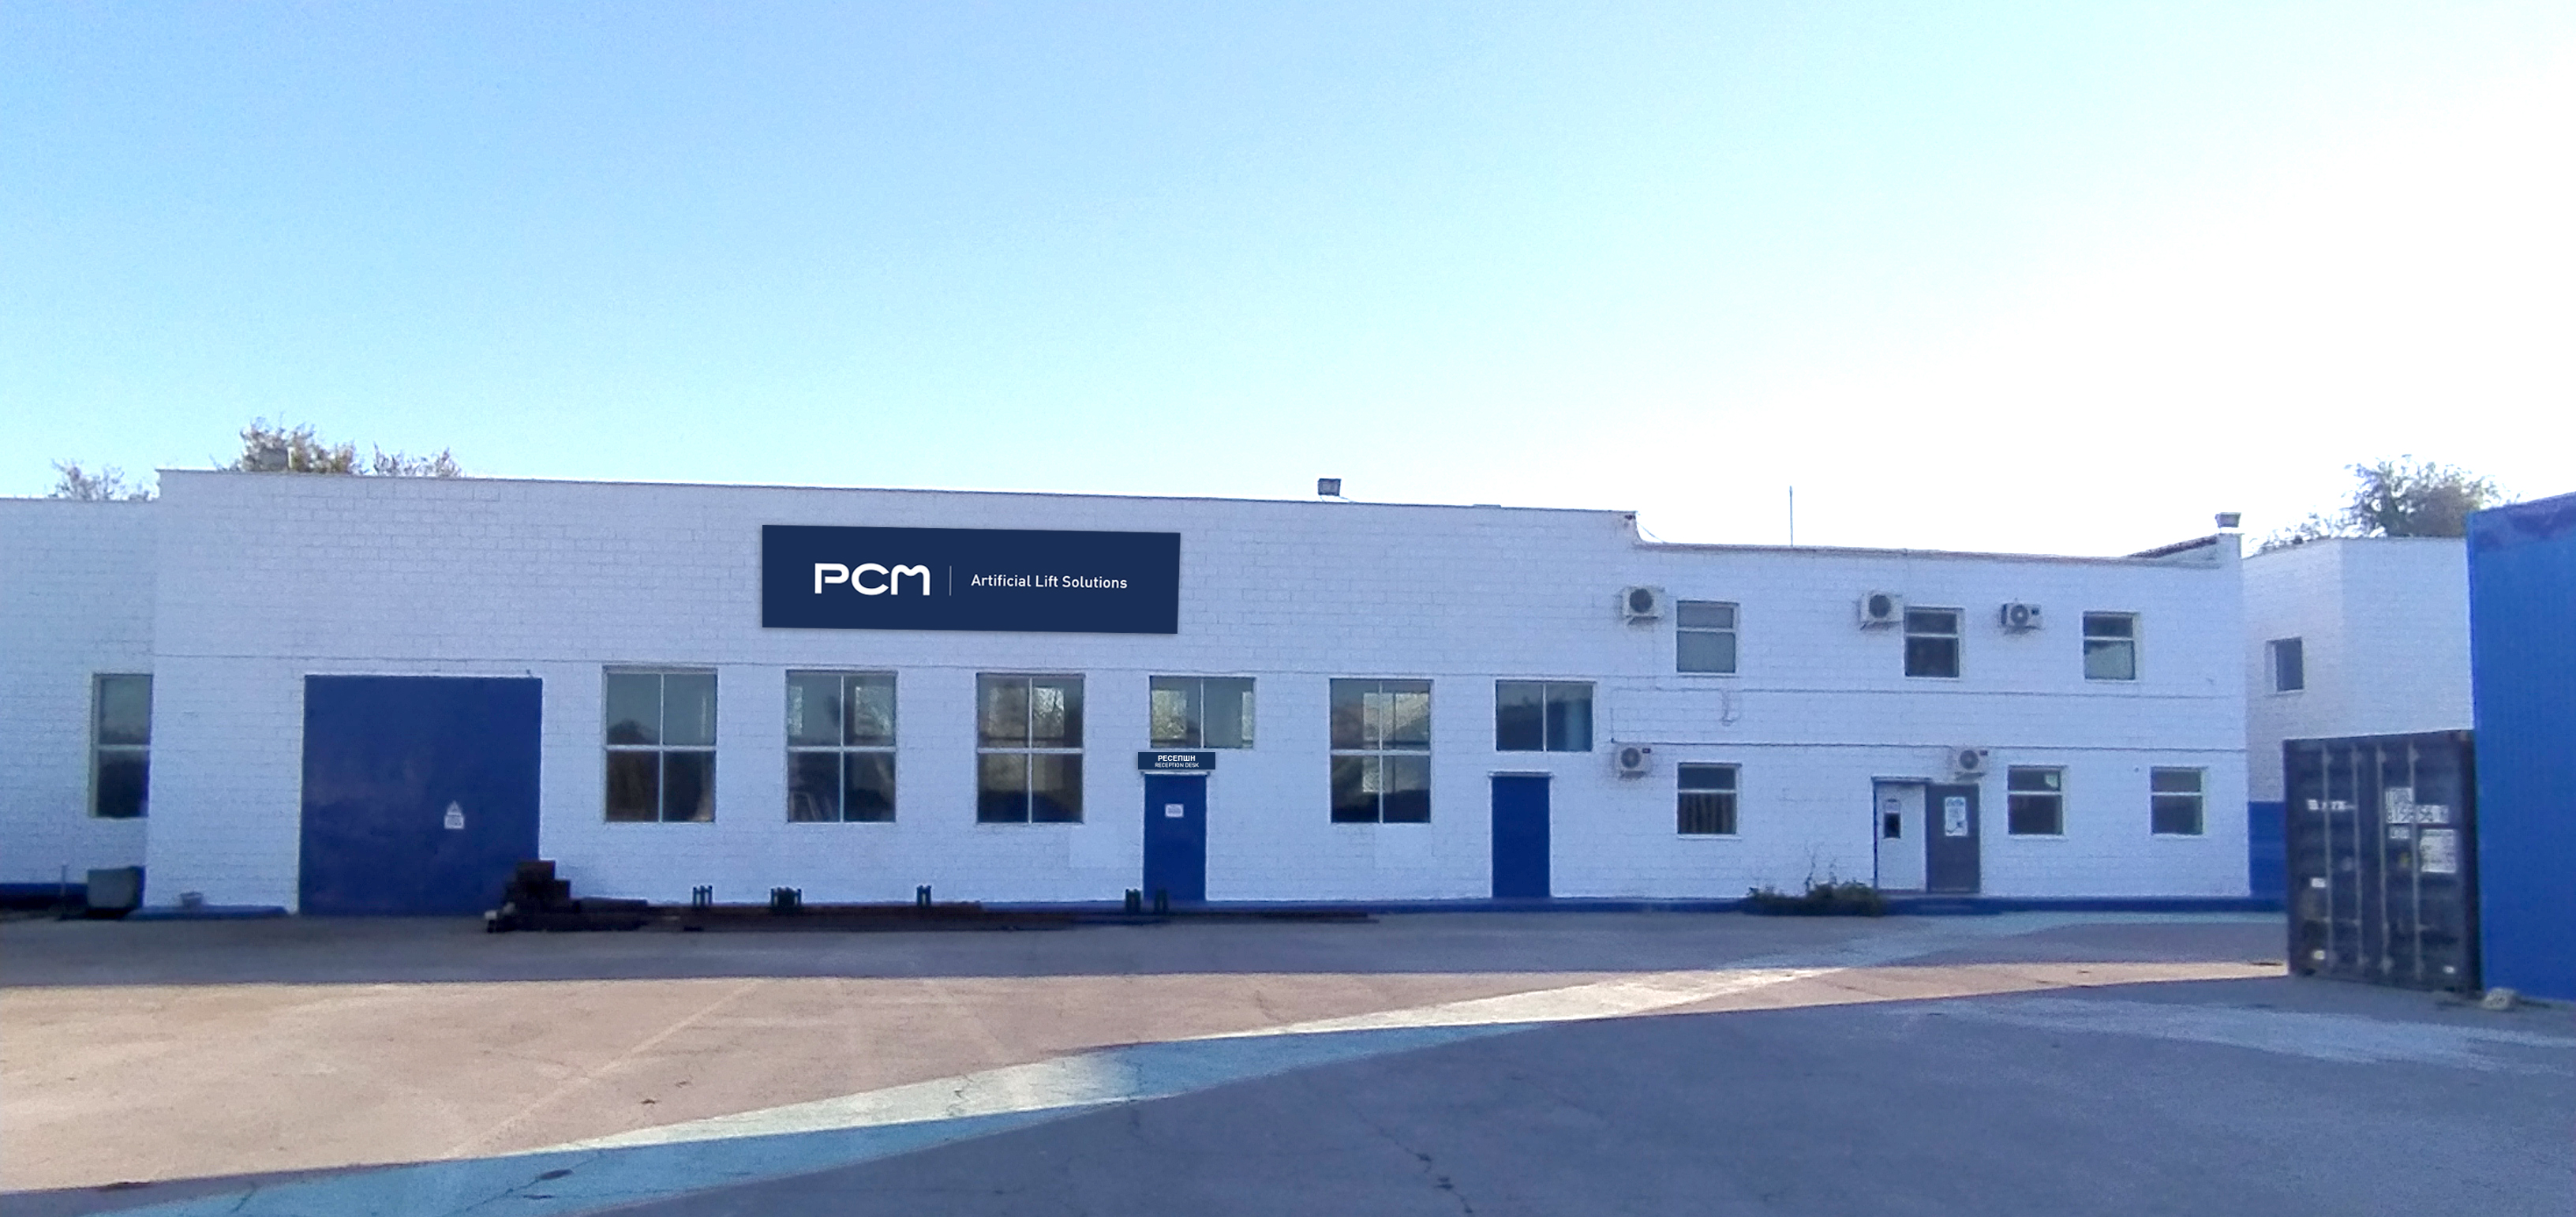 PCM KAZAKSTHAN PCP manufacturing workshop and customer technical center